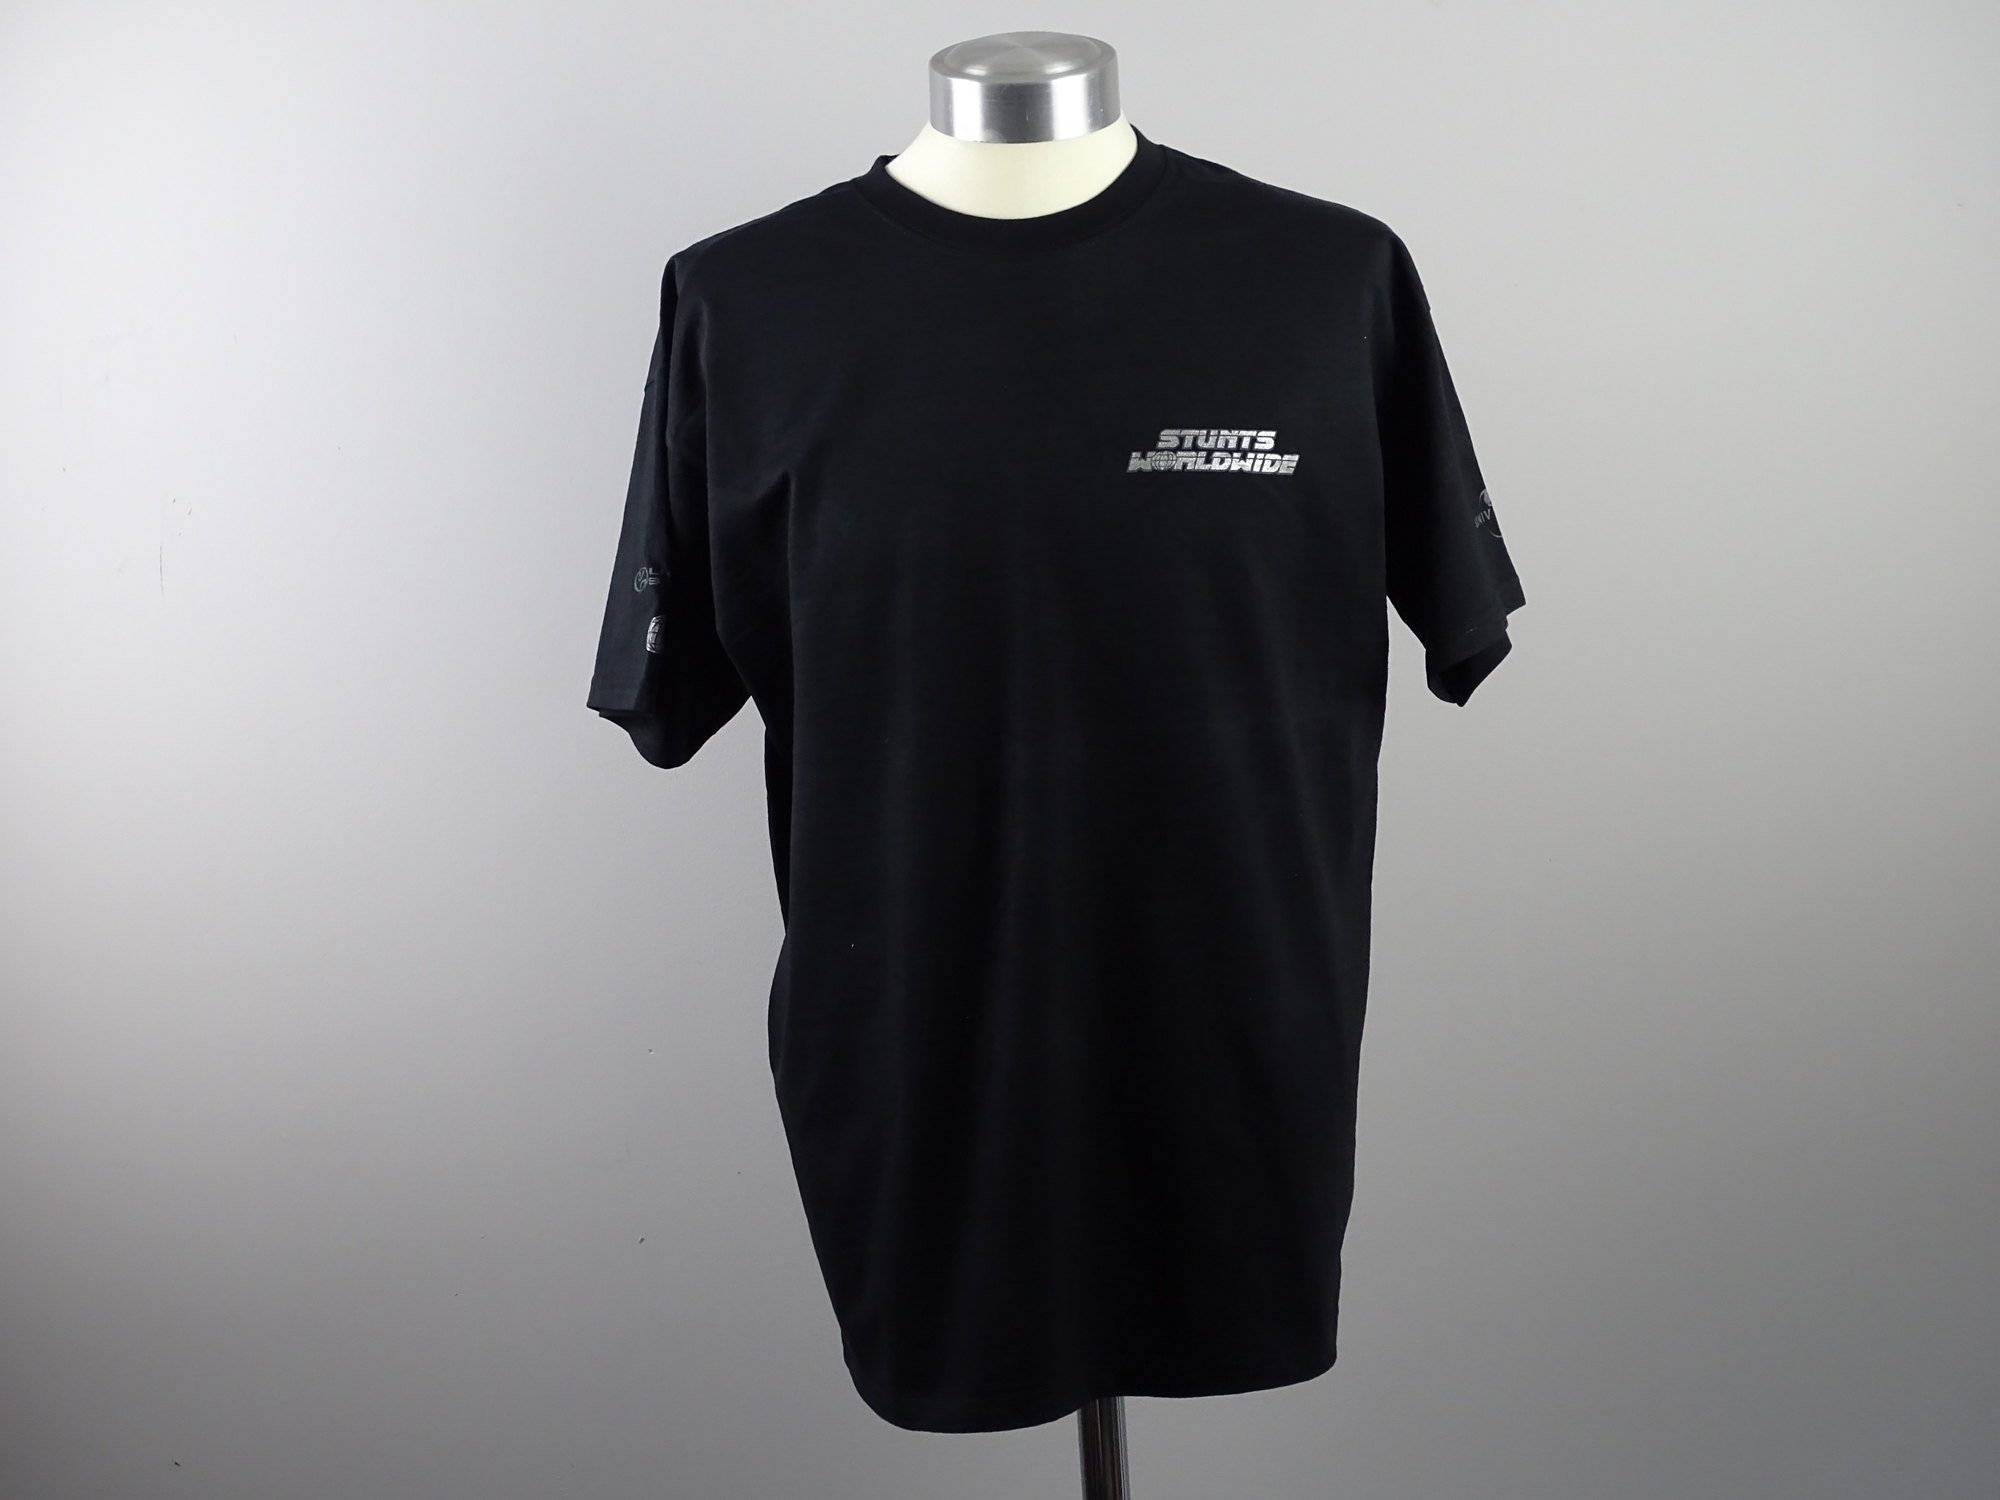 Film / Production Crew Issued Clothing: A group of three XL t-shirts - FAST AND FURIOUS 6 stunt crew - Image 5 of 6